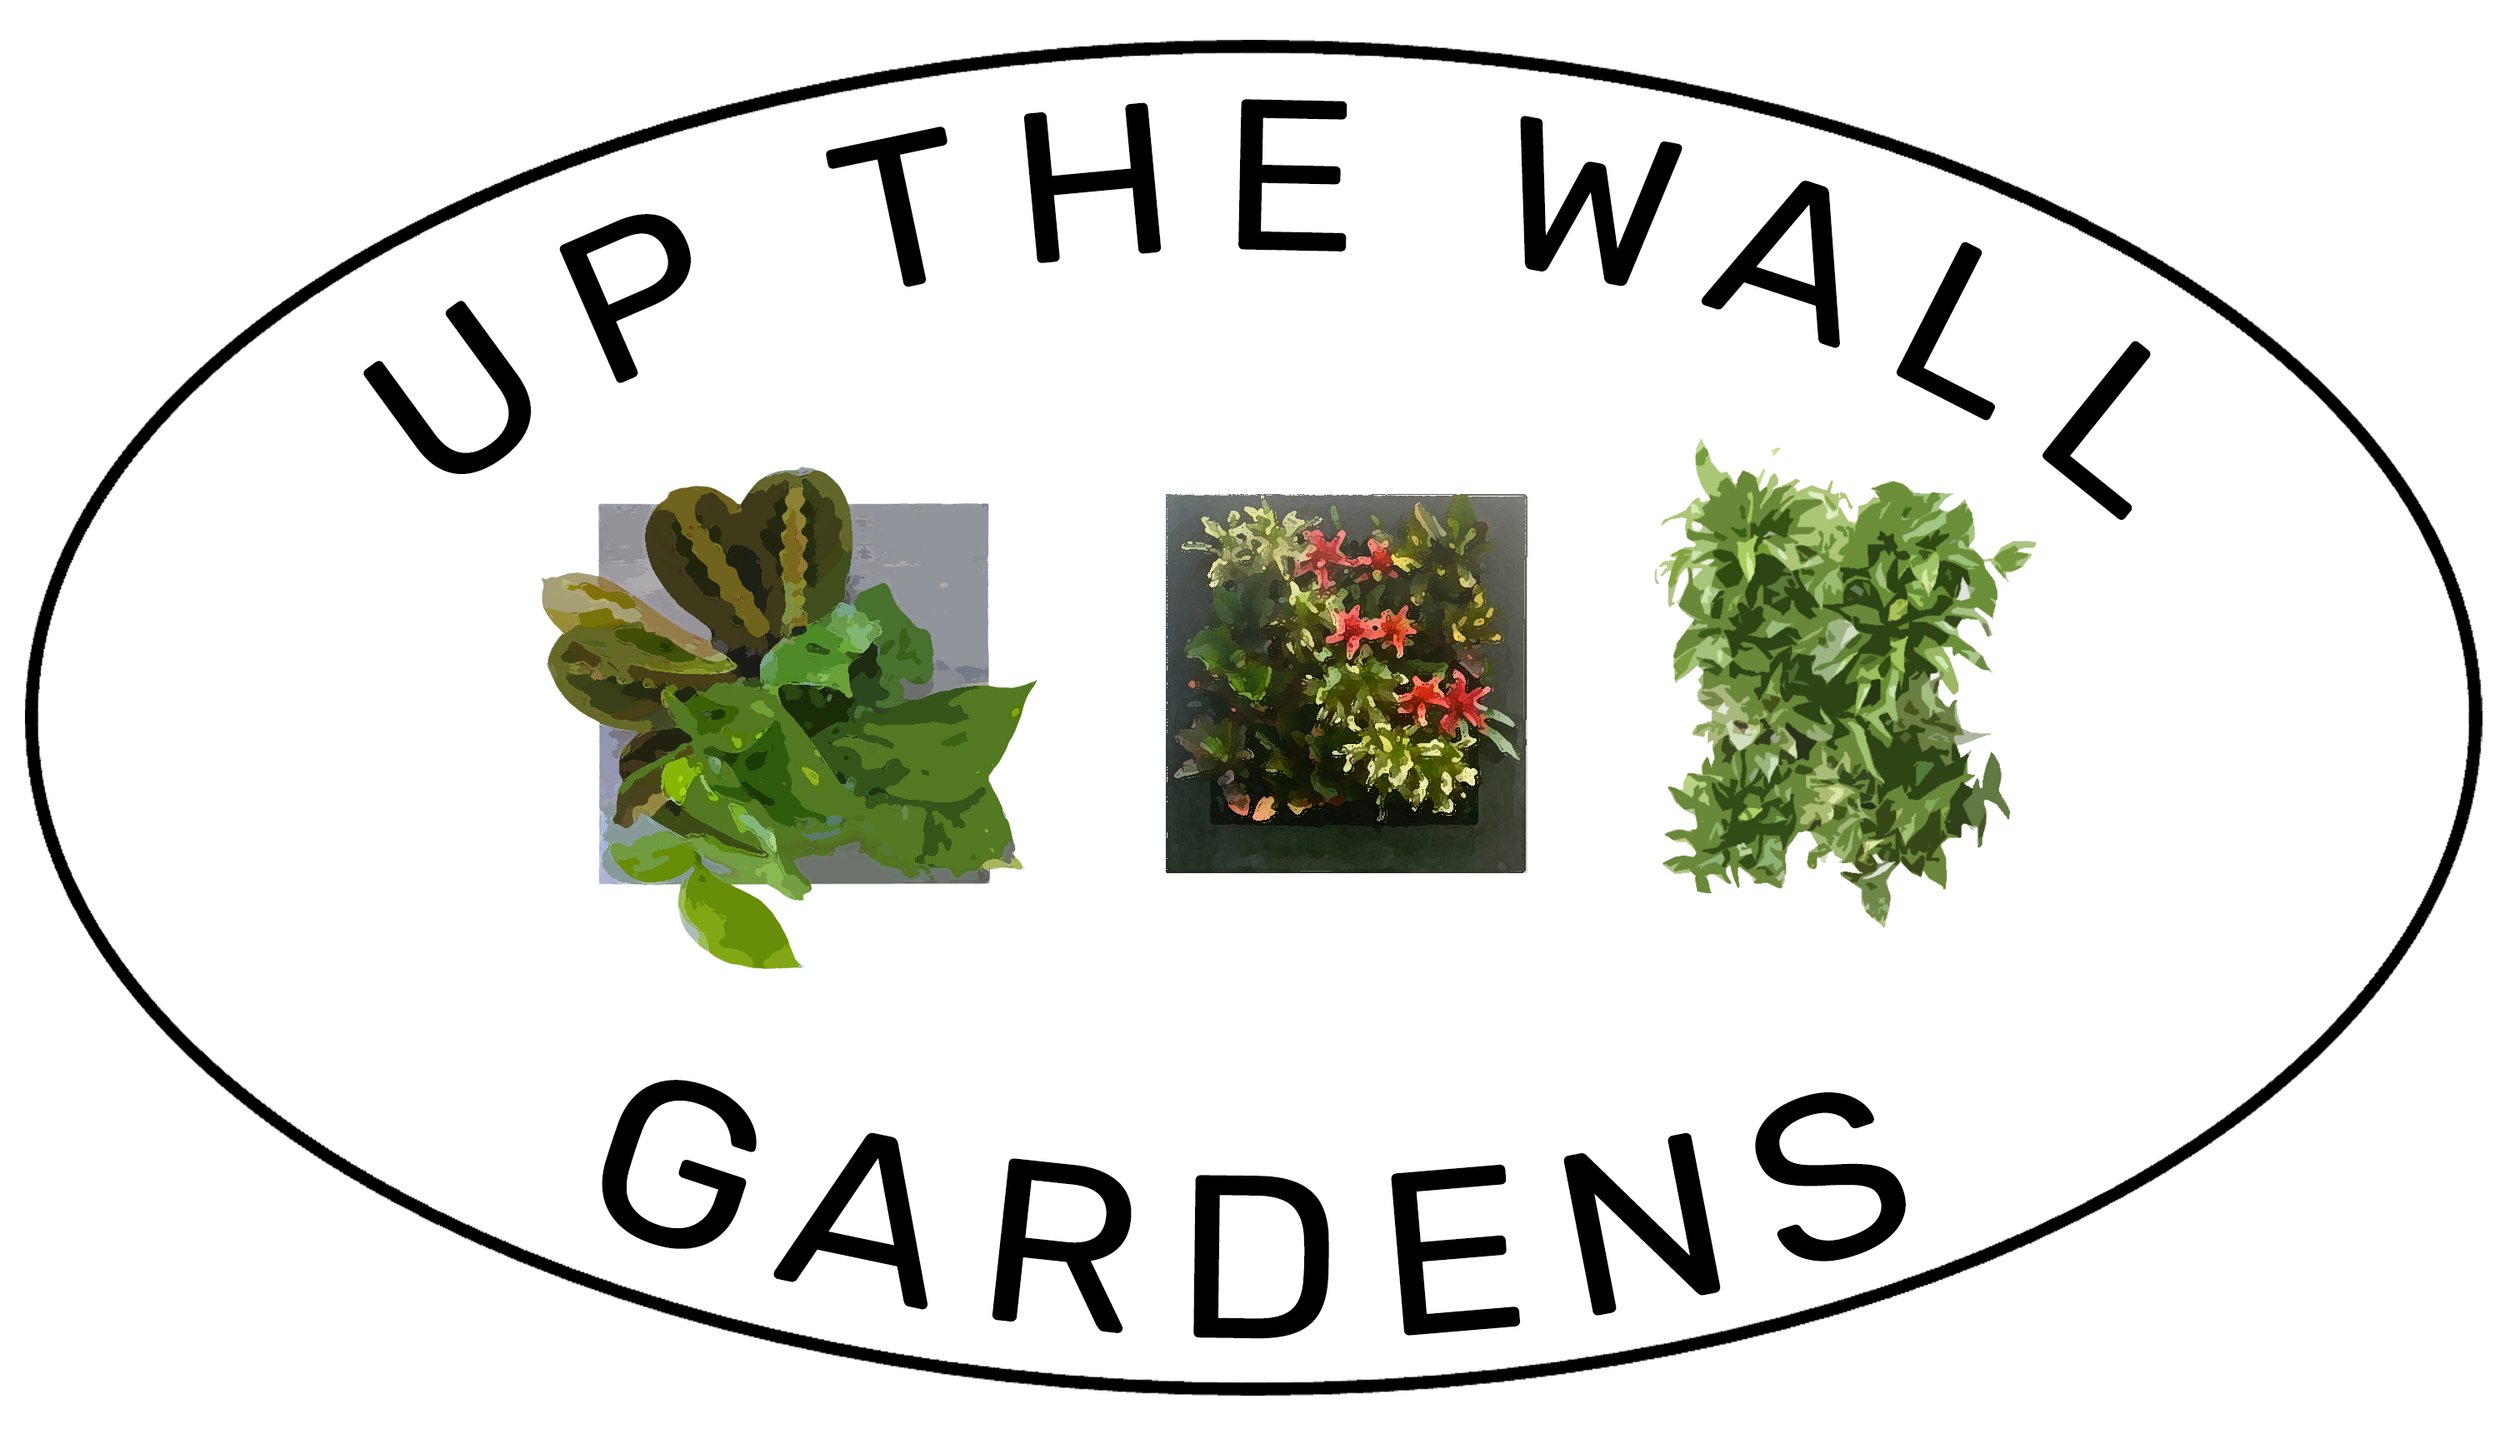 Up the Wall Gardens